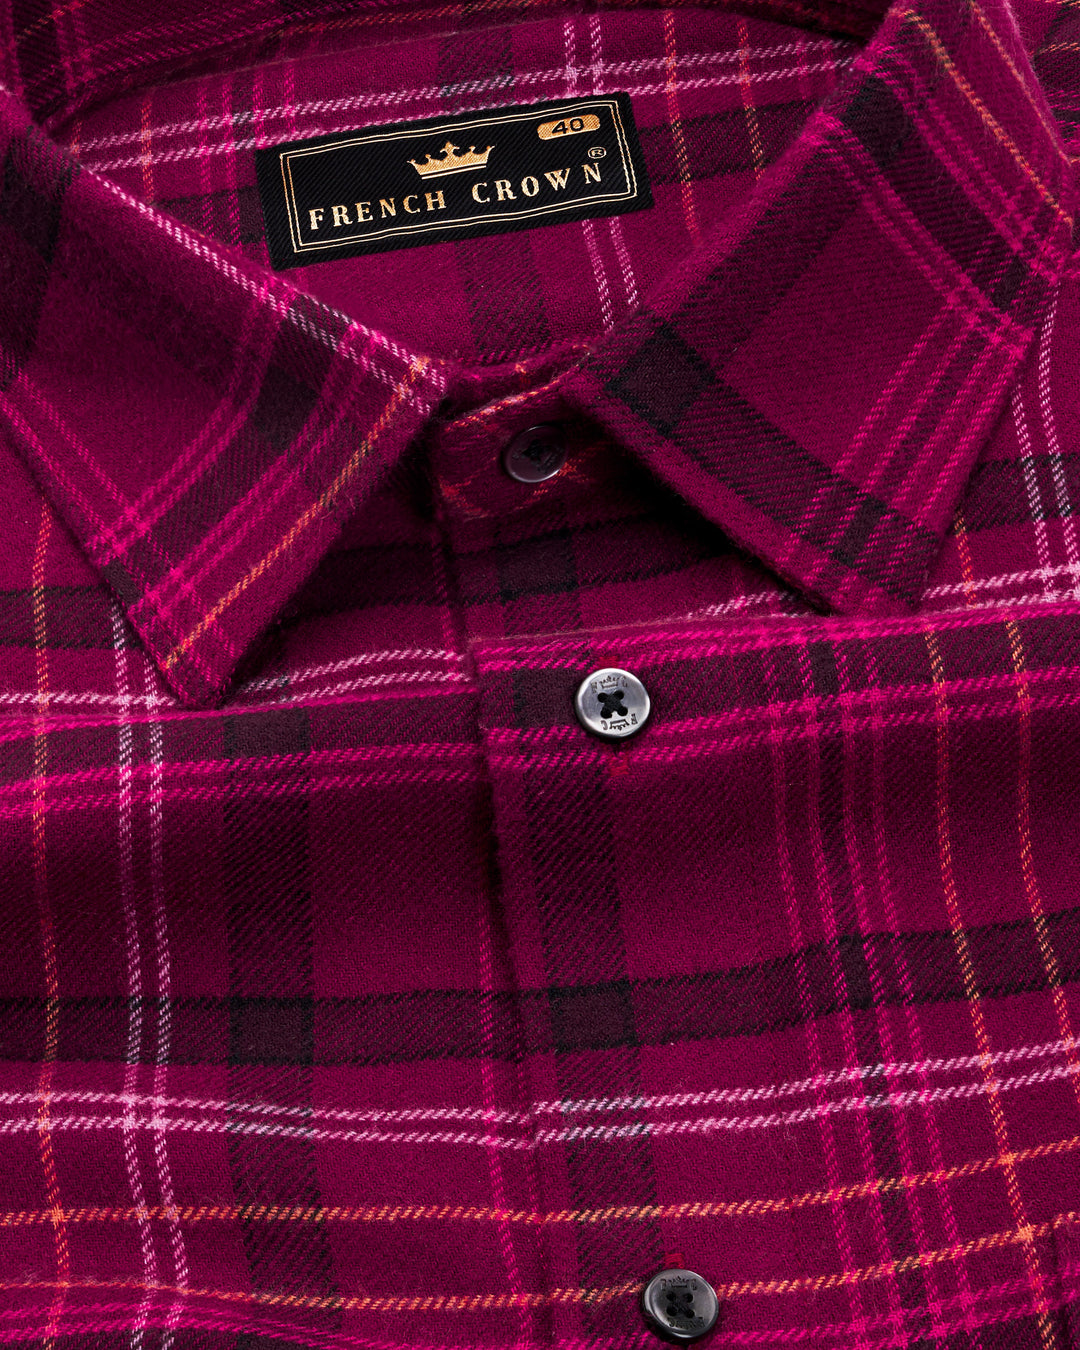 Flannel Shirts for Men